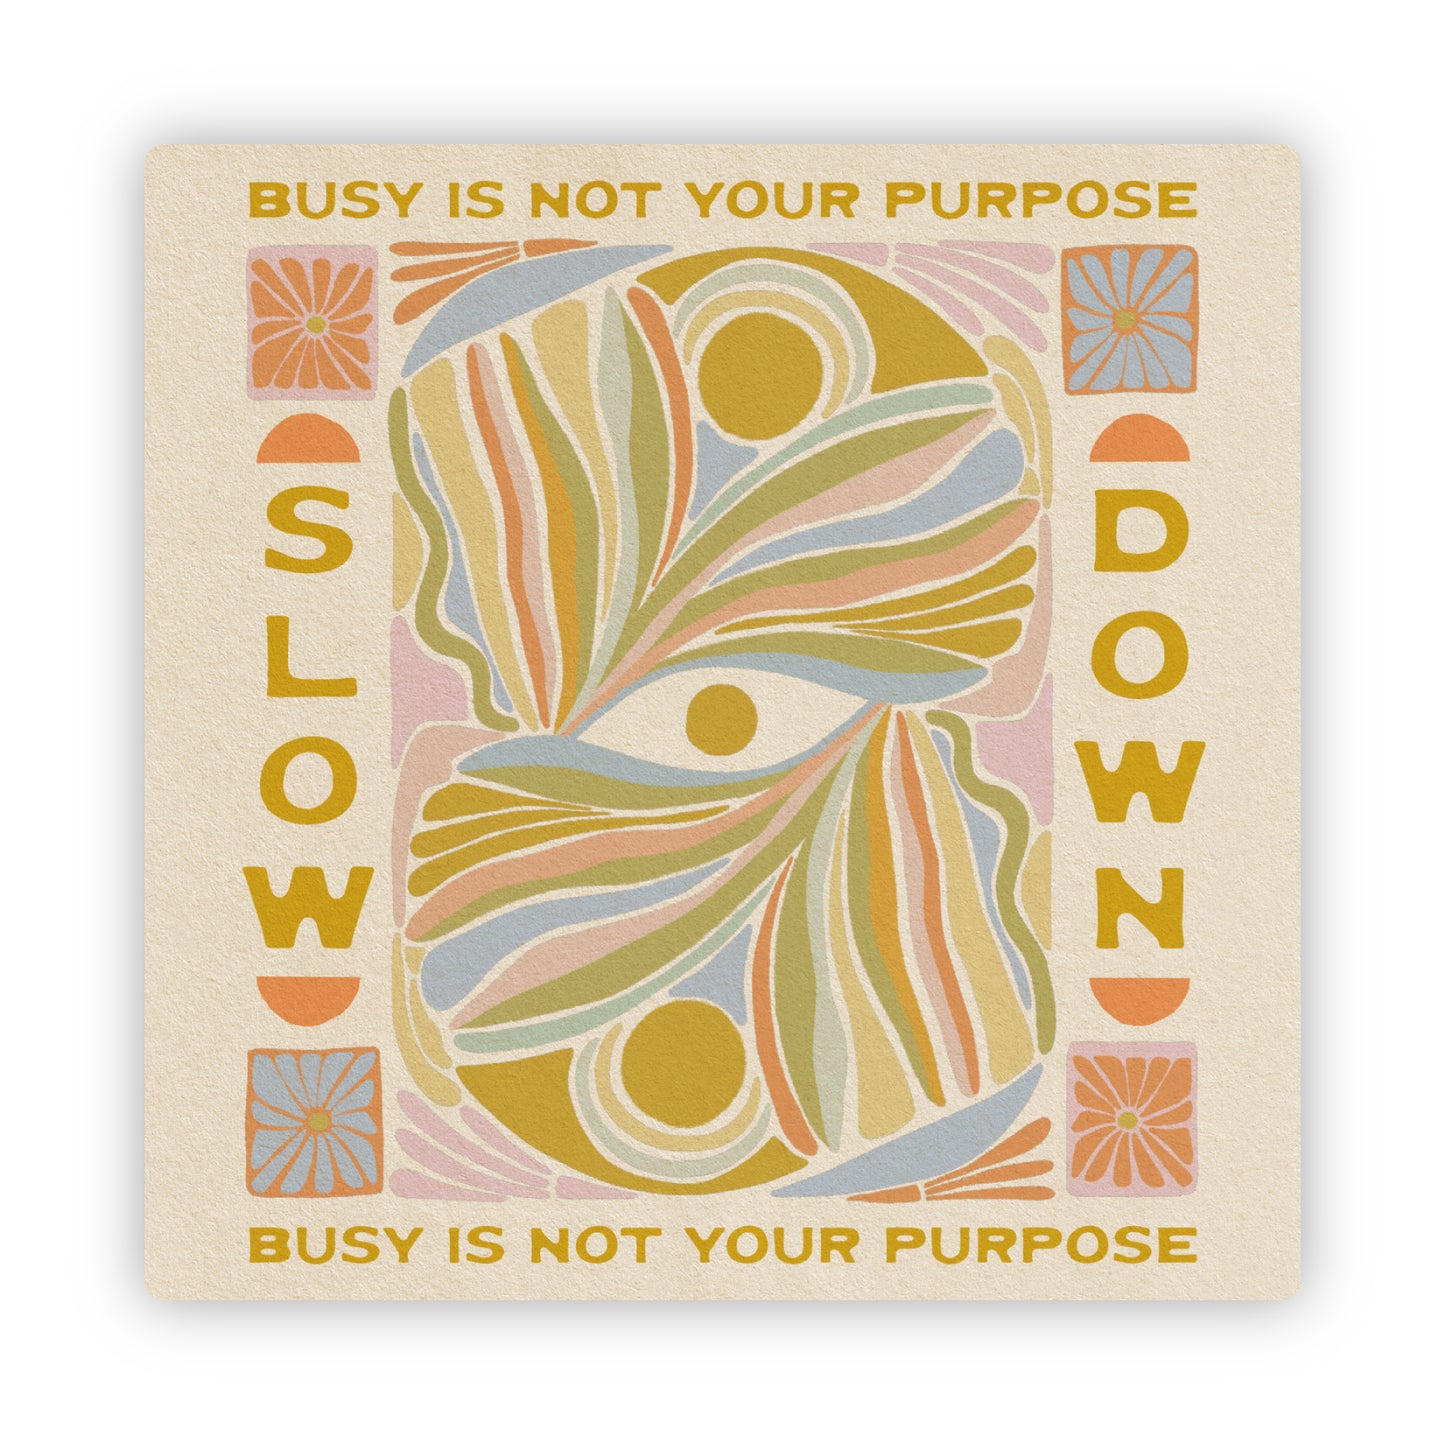 Slow Down, Busy Is Not Your Purpose - Vinyl Sticker